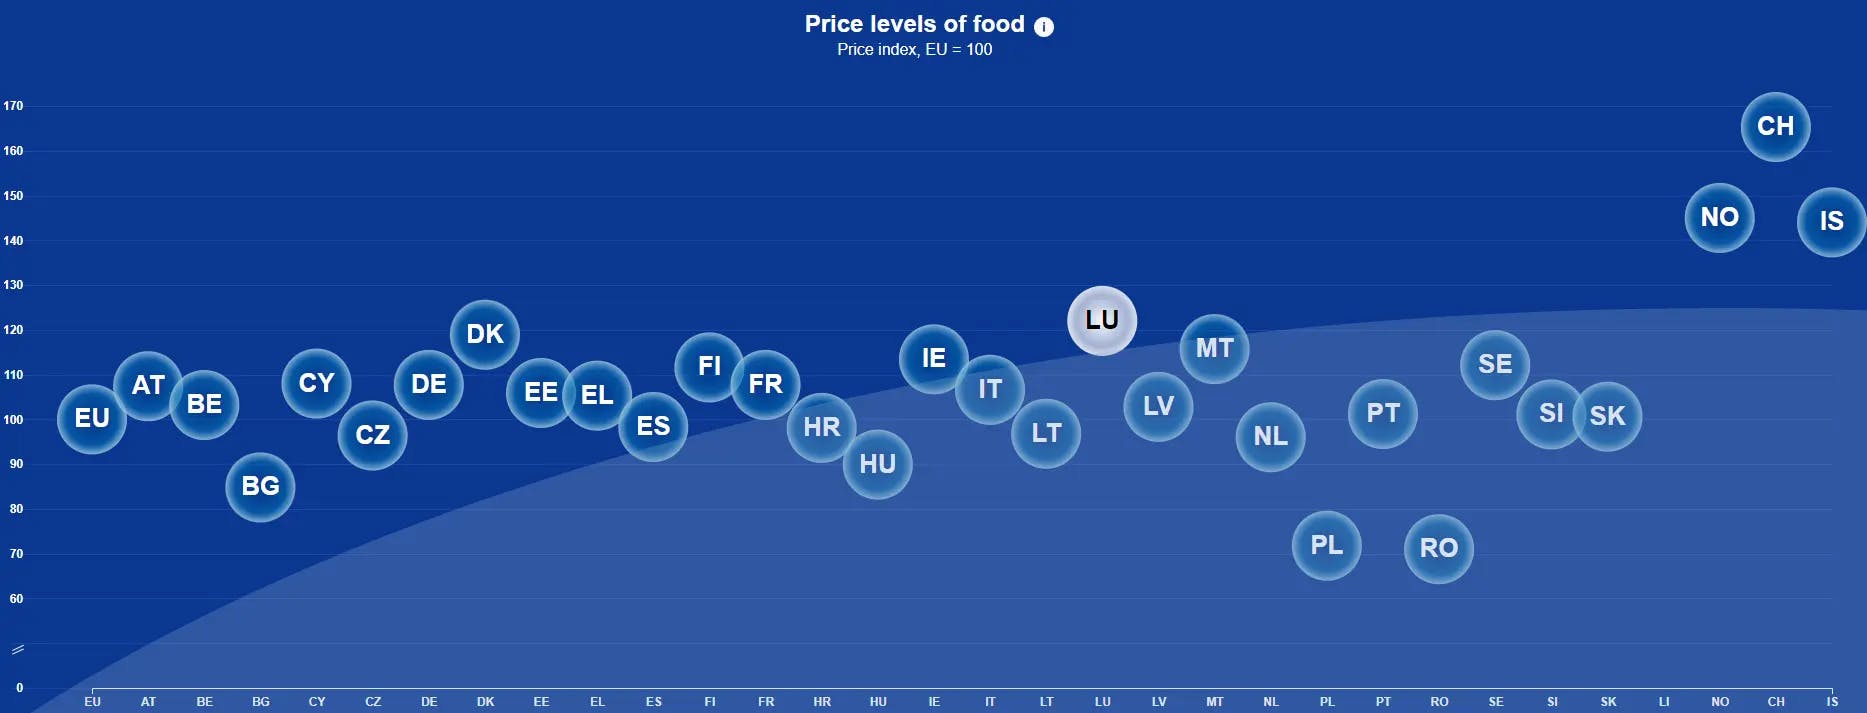 Price levels of food in EU